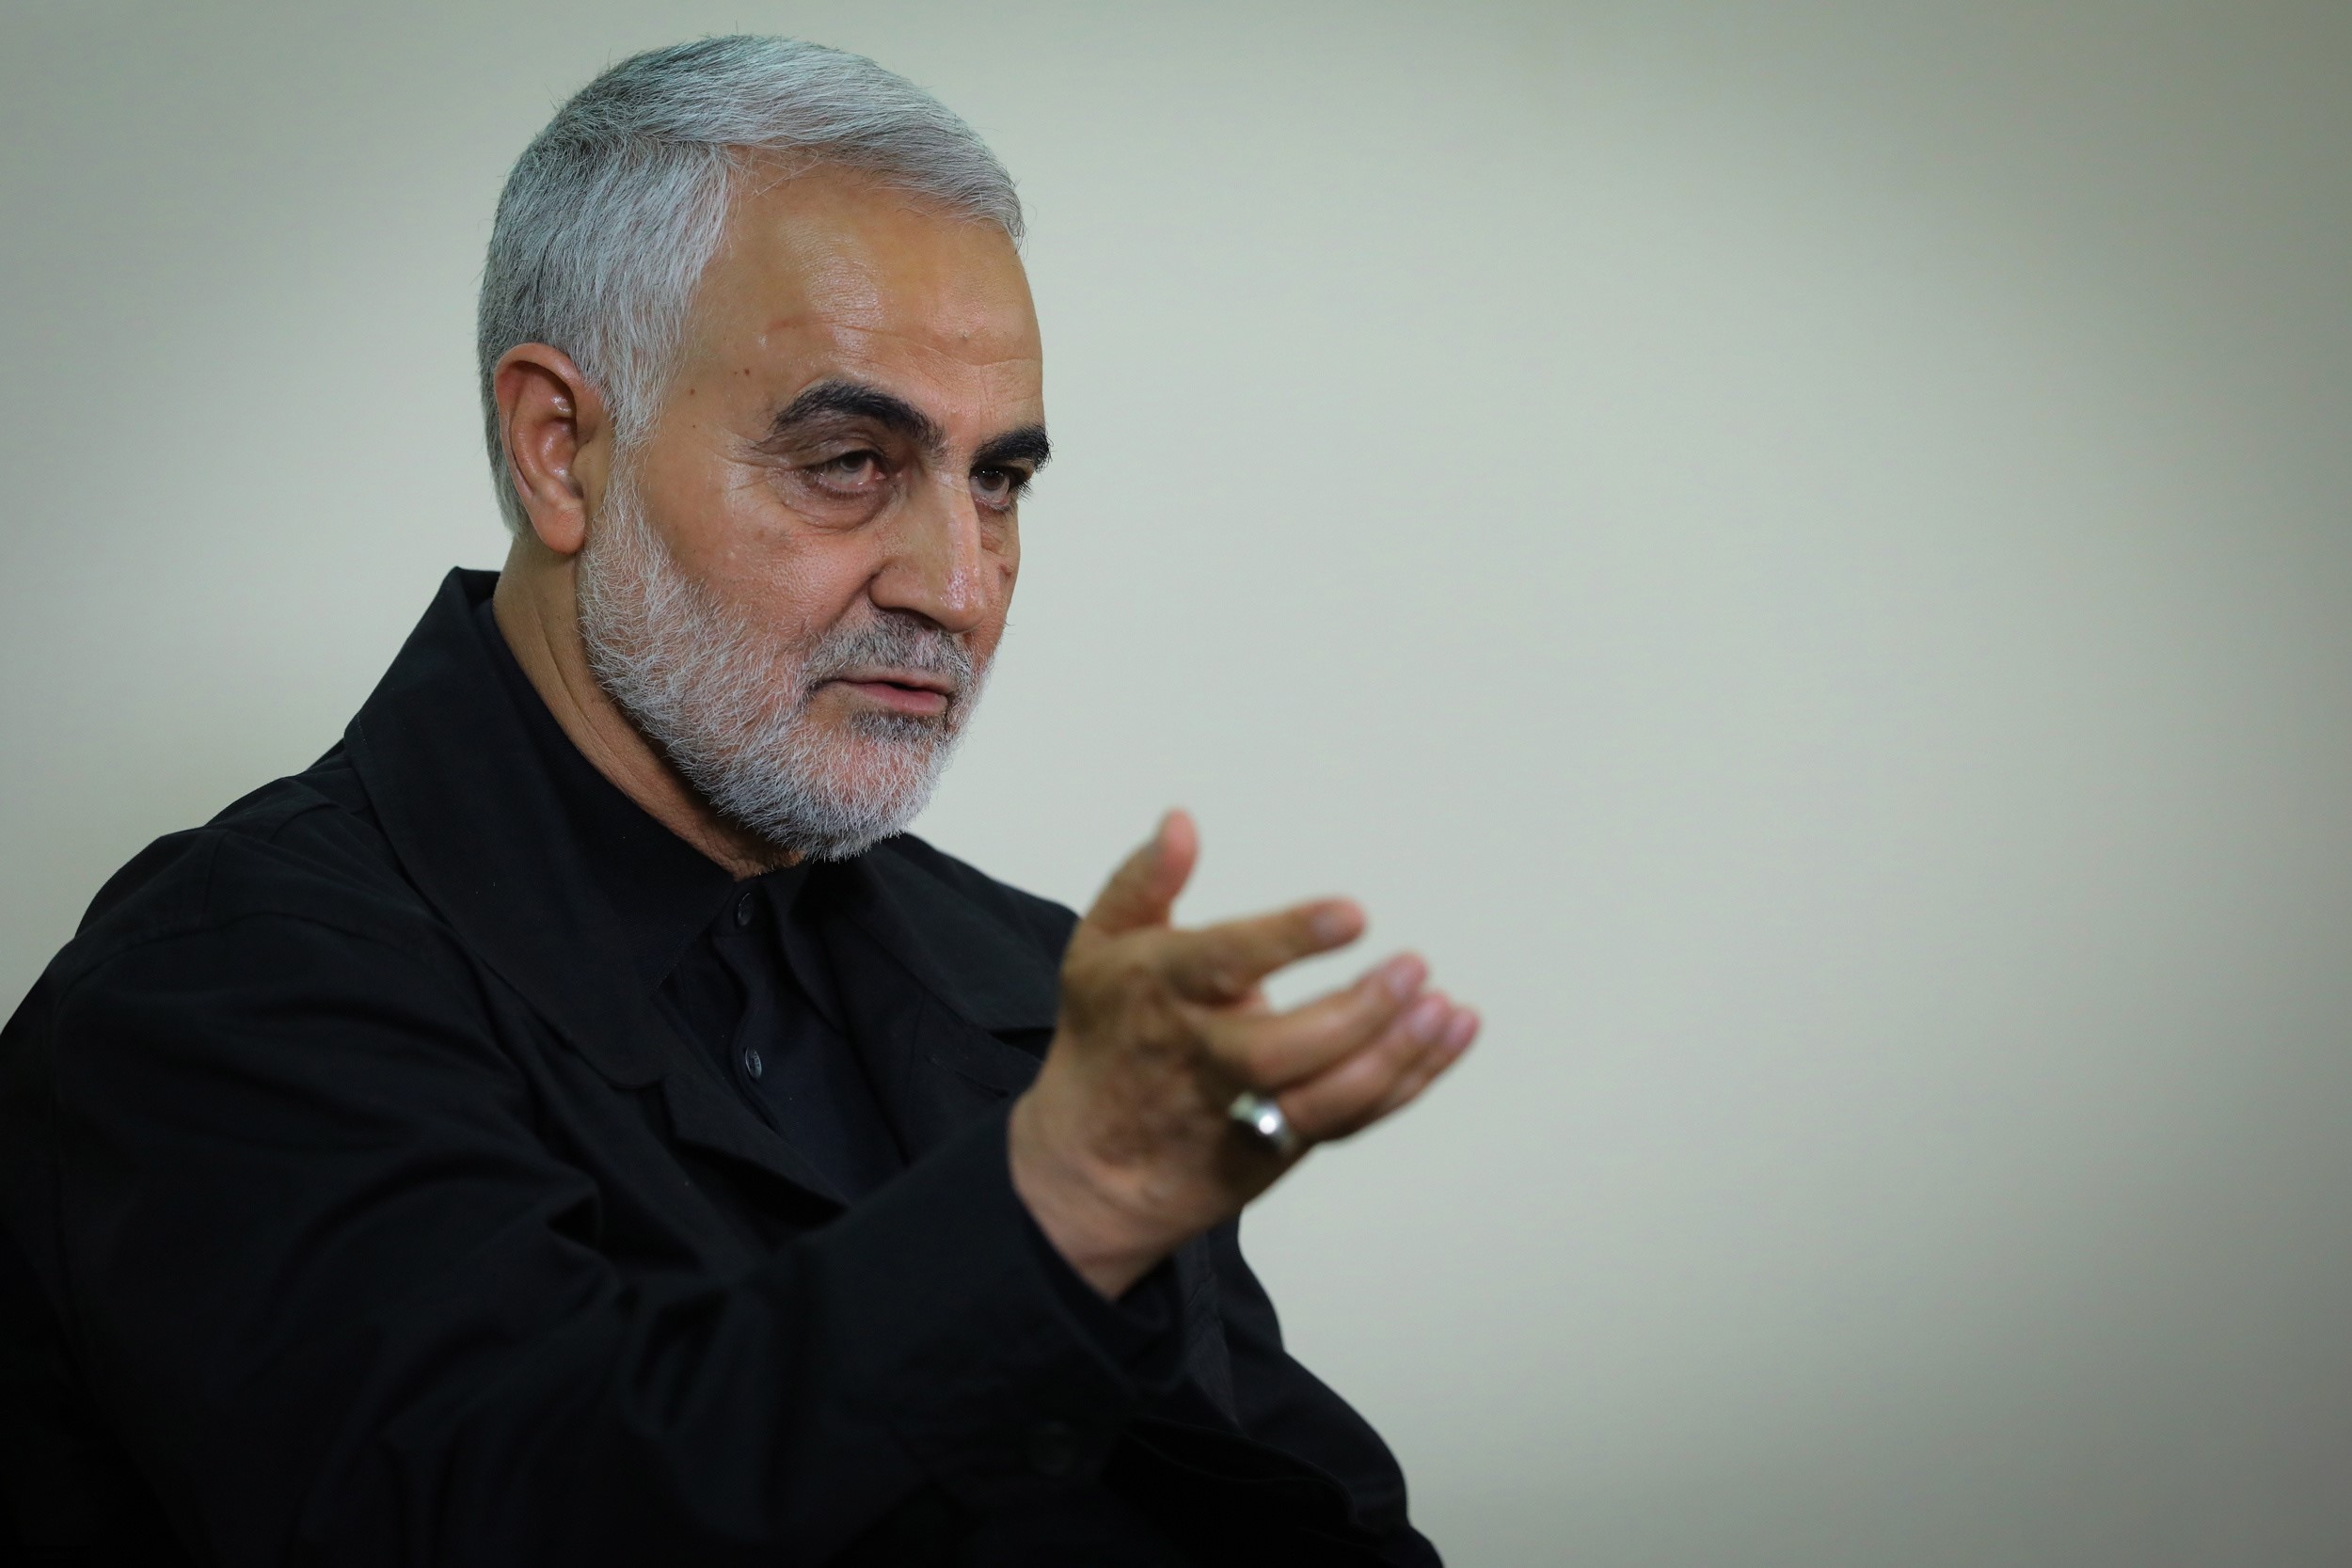 epa08099372 (FILE) - A handout photo made available by the Iranian Supreme Leader's office shows Iranian Revolutionary Guards Corps (IRGC) Lieutenant general and commander of the Quds Force Qasem Soleimani during an interview with a member of the Supreme Leader's office in Tehran, Iran, 01 October 2019 (reissued 03 January 2020). Iran's Quds Force leader Soleimani and Iraqi militia commander Abu Mahdi al-Muhandis were killed on 03 January 2020 following a US airstrike at Baghdad's international airport, the Pentagon confirmed. The attack comes amid escalating tensions between Tehran and Washington.  EPA/IRANIAN SUPREME LEADER'S OFFICE HANDOUT  HANDOUT EDITORIAL USE ONLY/NO SALES